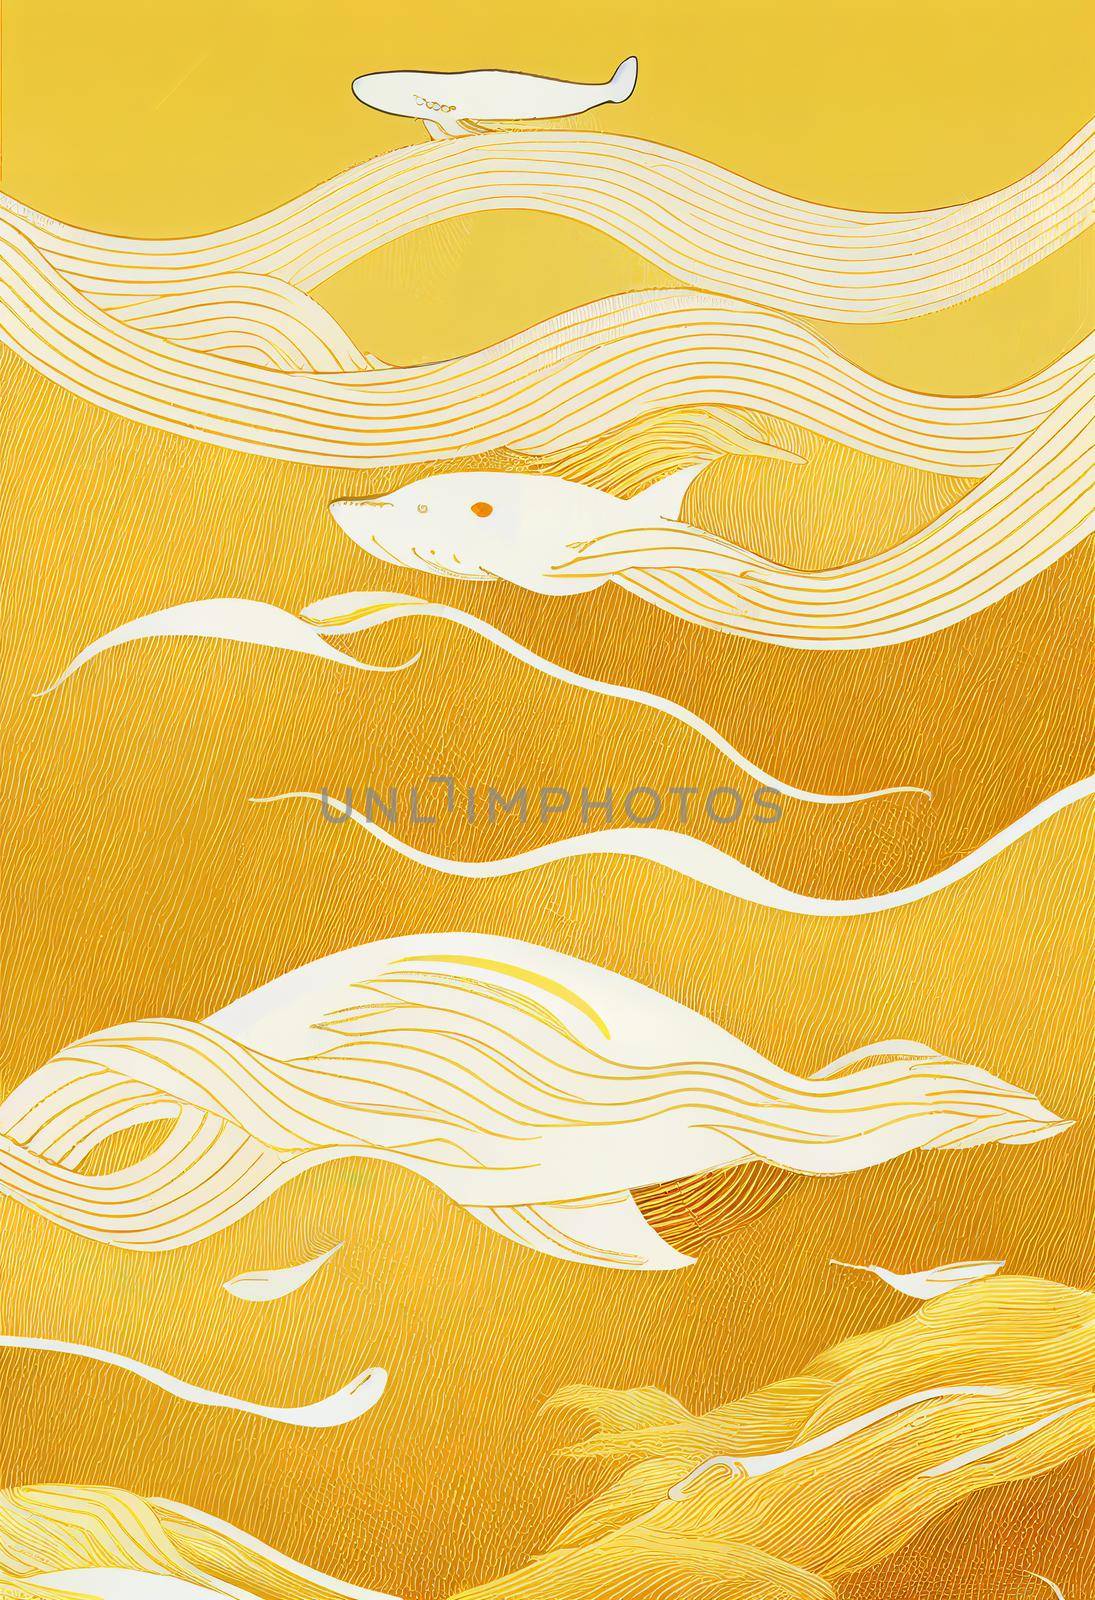 Stylish Japanese style poster with waves and whale of golden lines for textile and social media decoration, minimal art. High quality 3d illustration